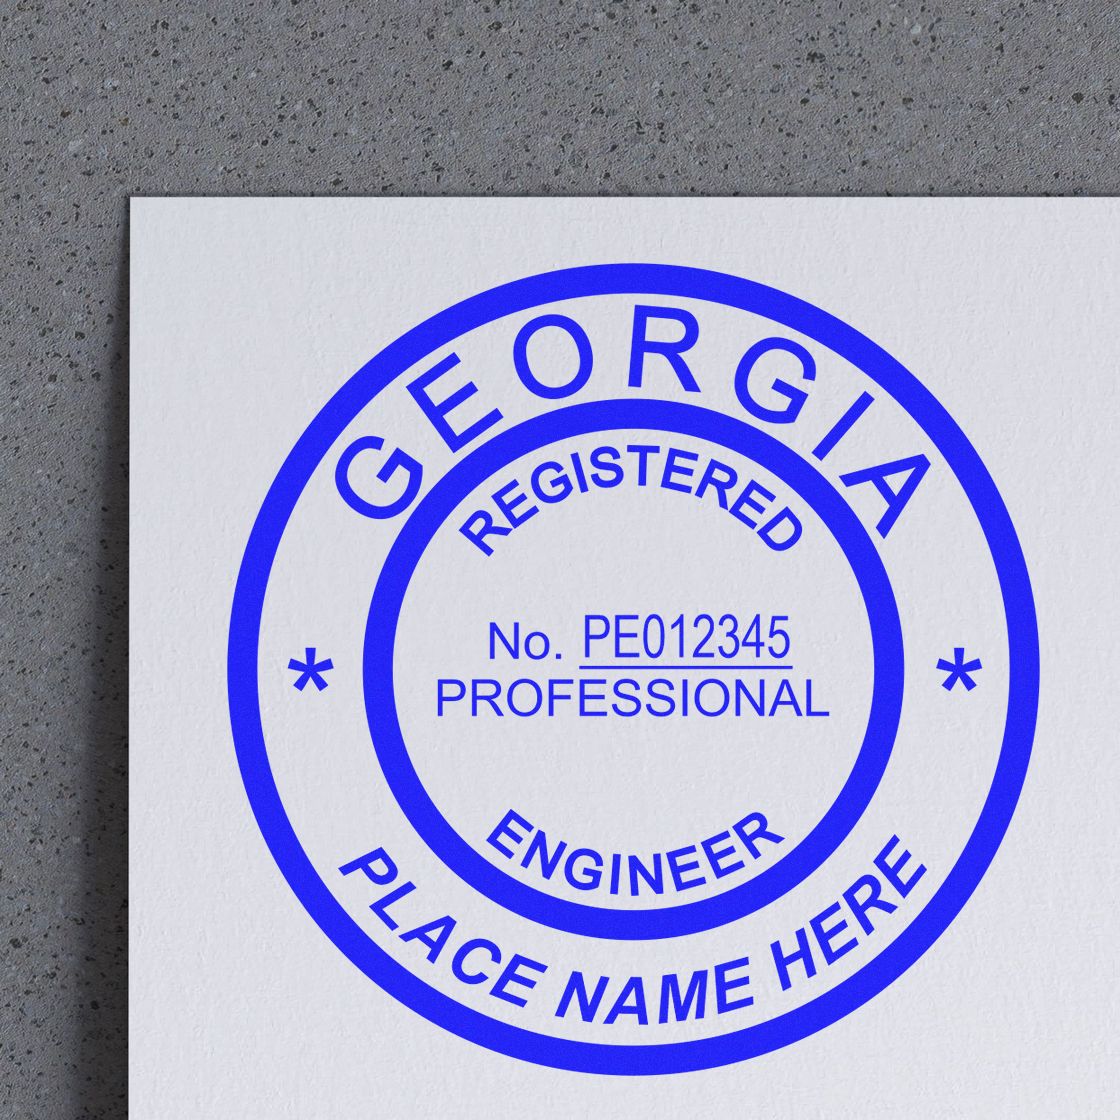 An alternative view of the Georgia Professional Engineer Seal Stamp stamped on a sheet of paper showing the image in use